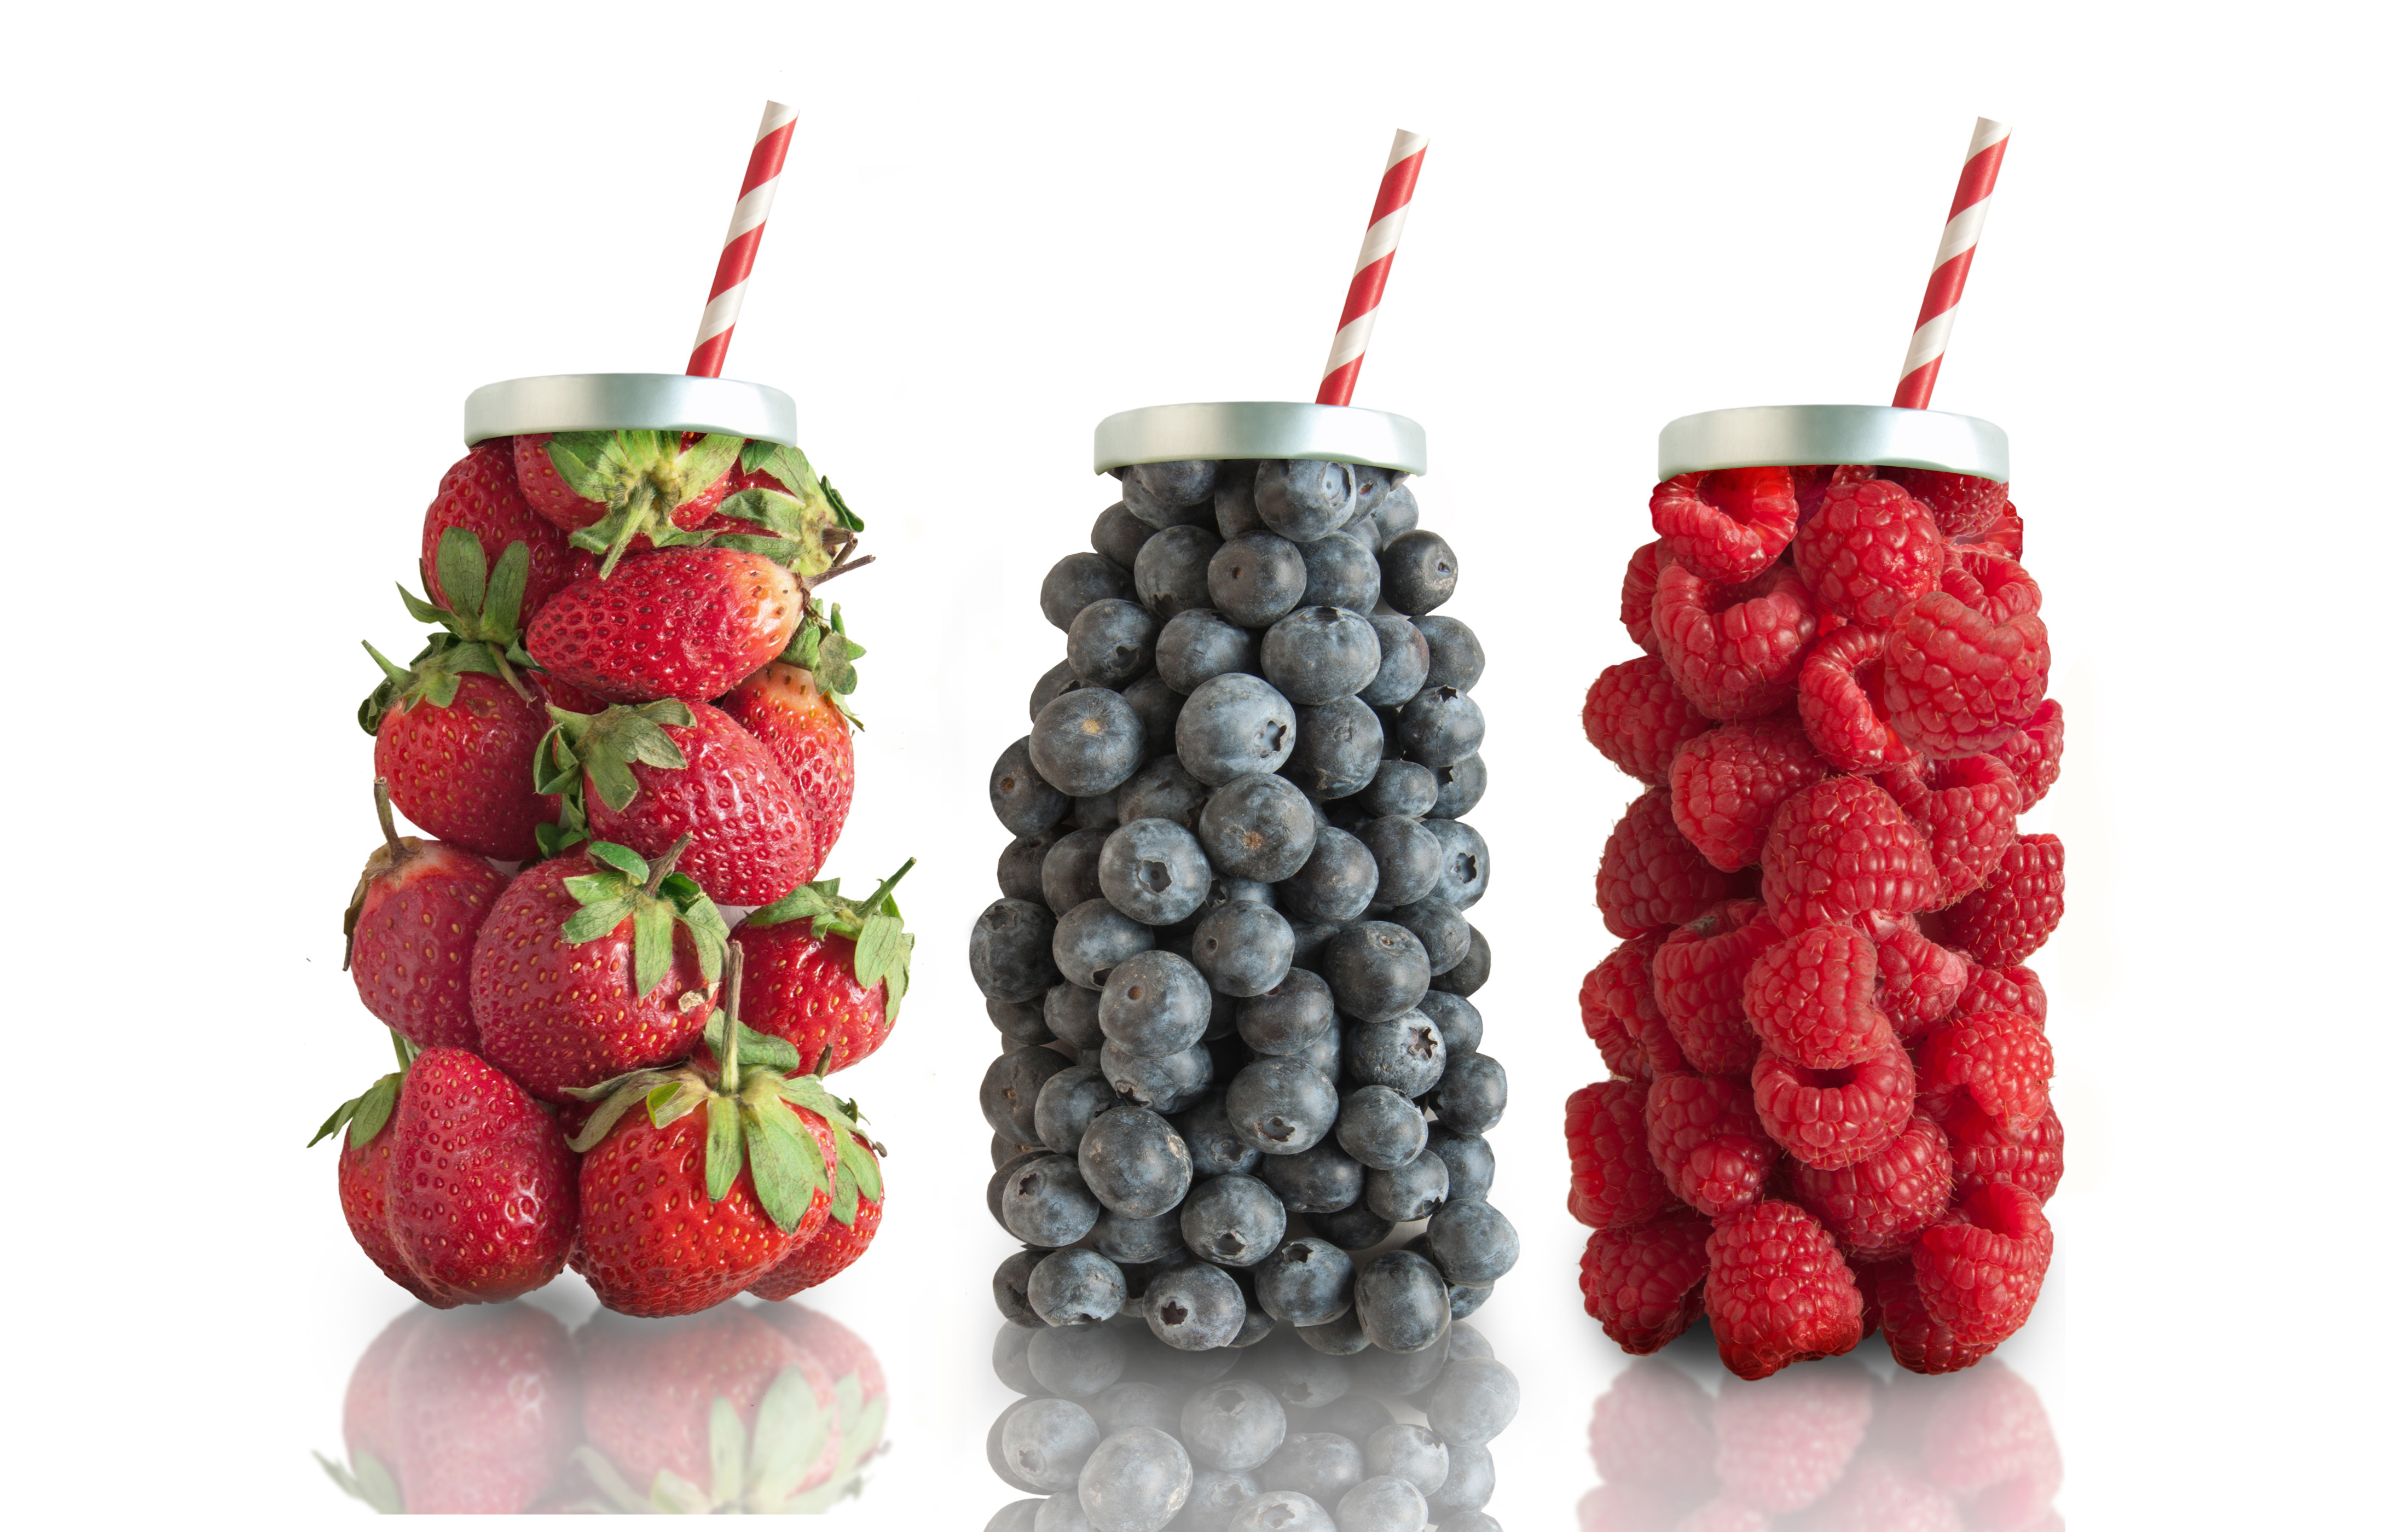 Sugars reduced in berry fruit juice by up to 50% using sugar-reducing beads